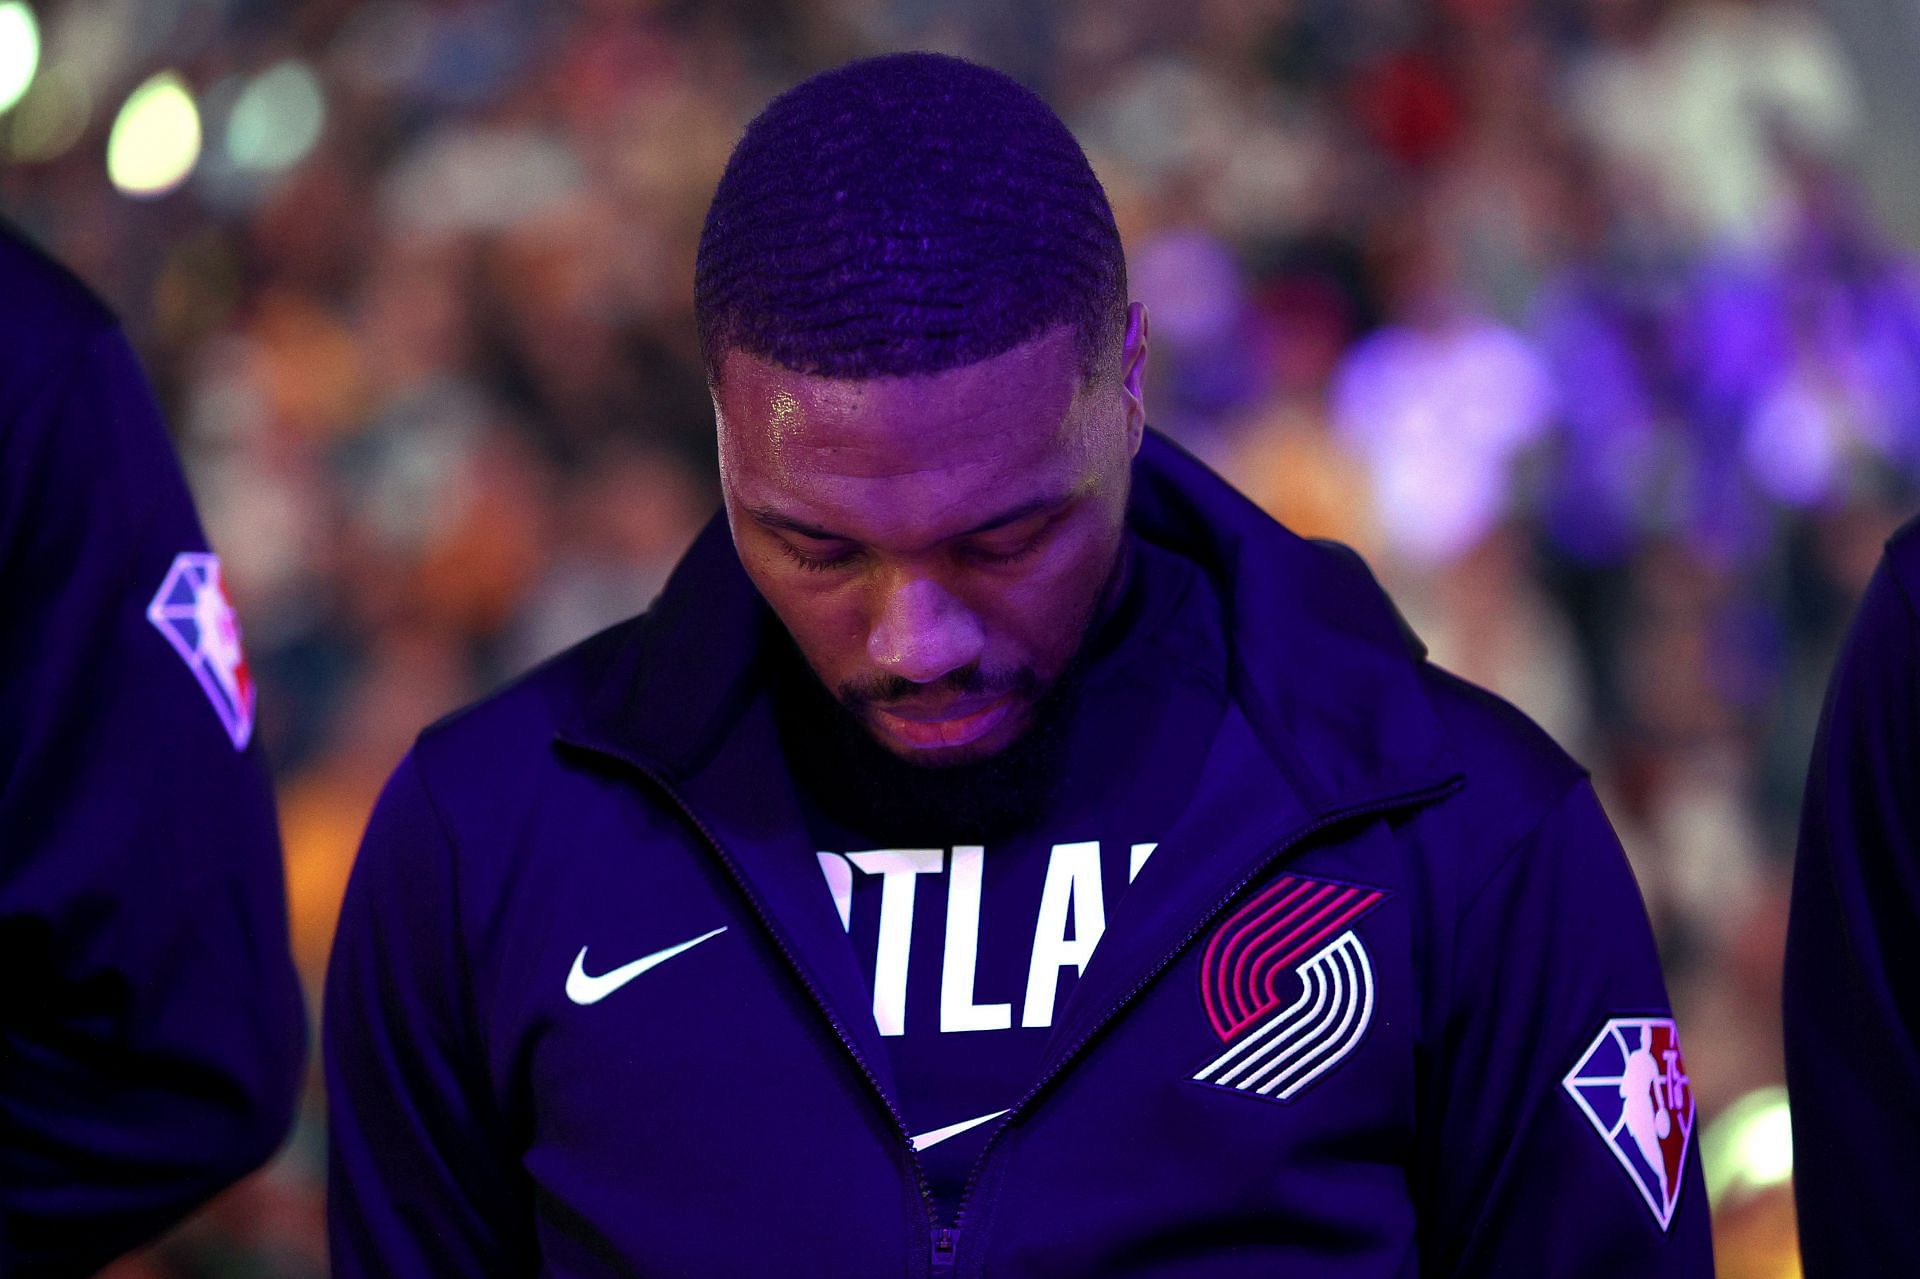 Damian Lillard #0 of the Portland Trail Blazers stands during the national anthem before the game against the Golden State Warriors at Chase Center on November 26, 2021 in San Francisco, California.